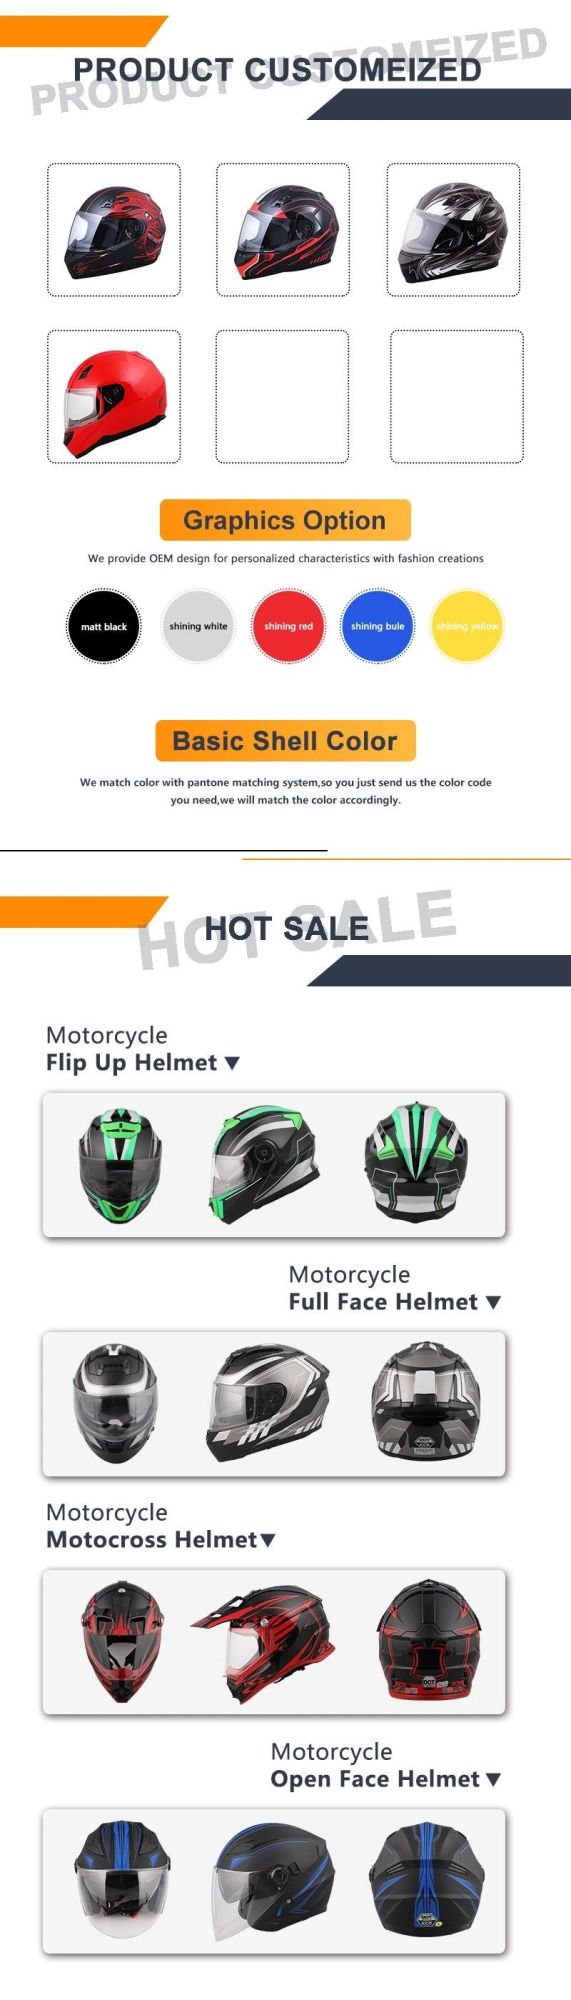 Cool Style Motorcycle Full Face Helmets Best Price with DOT Approved